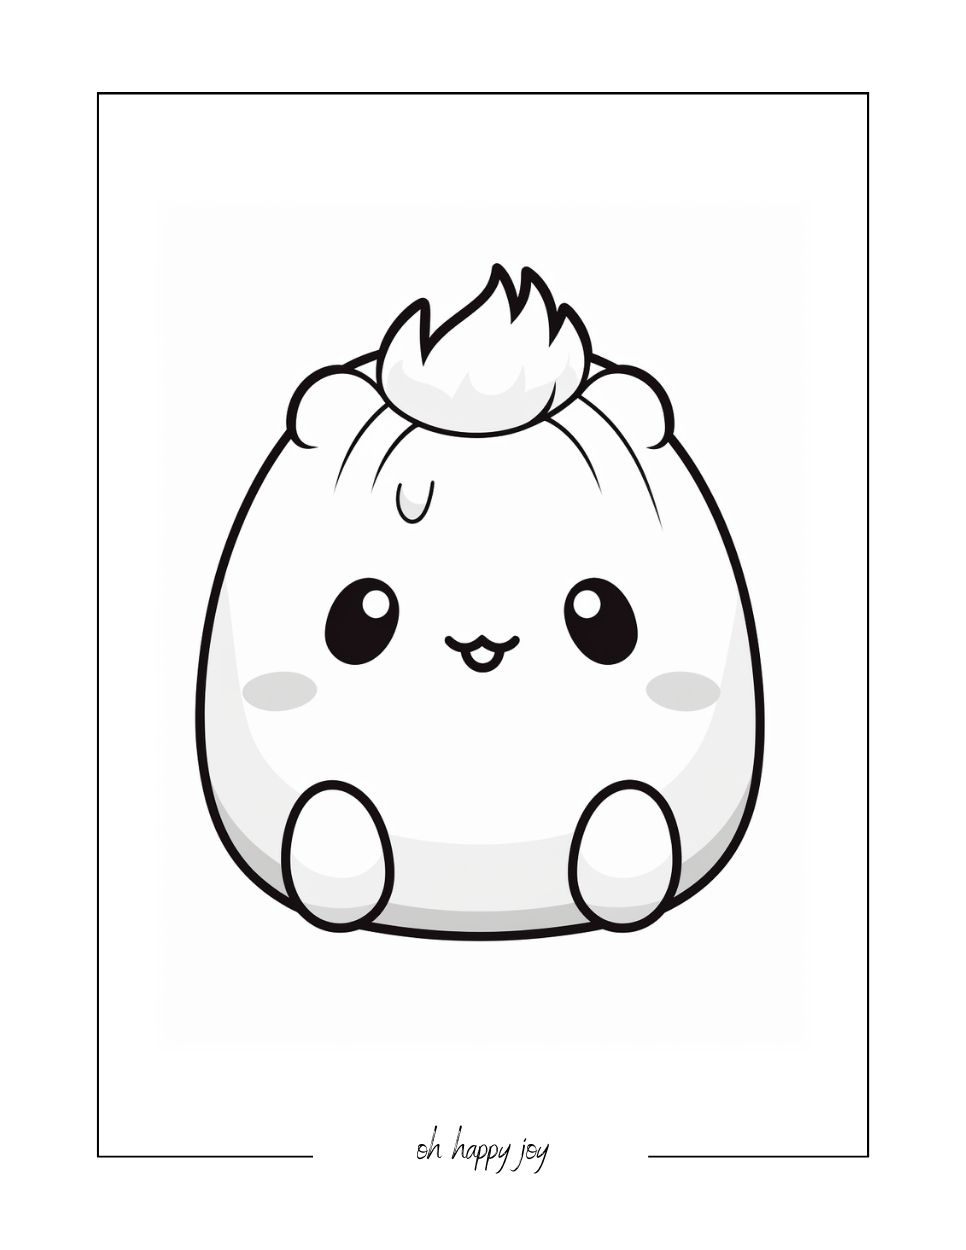 Cool squishmallow free printable